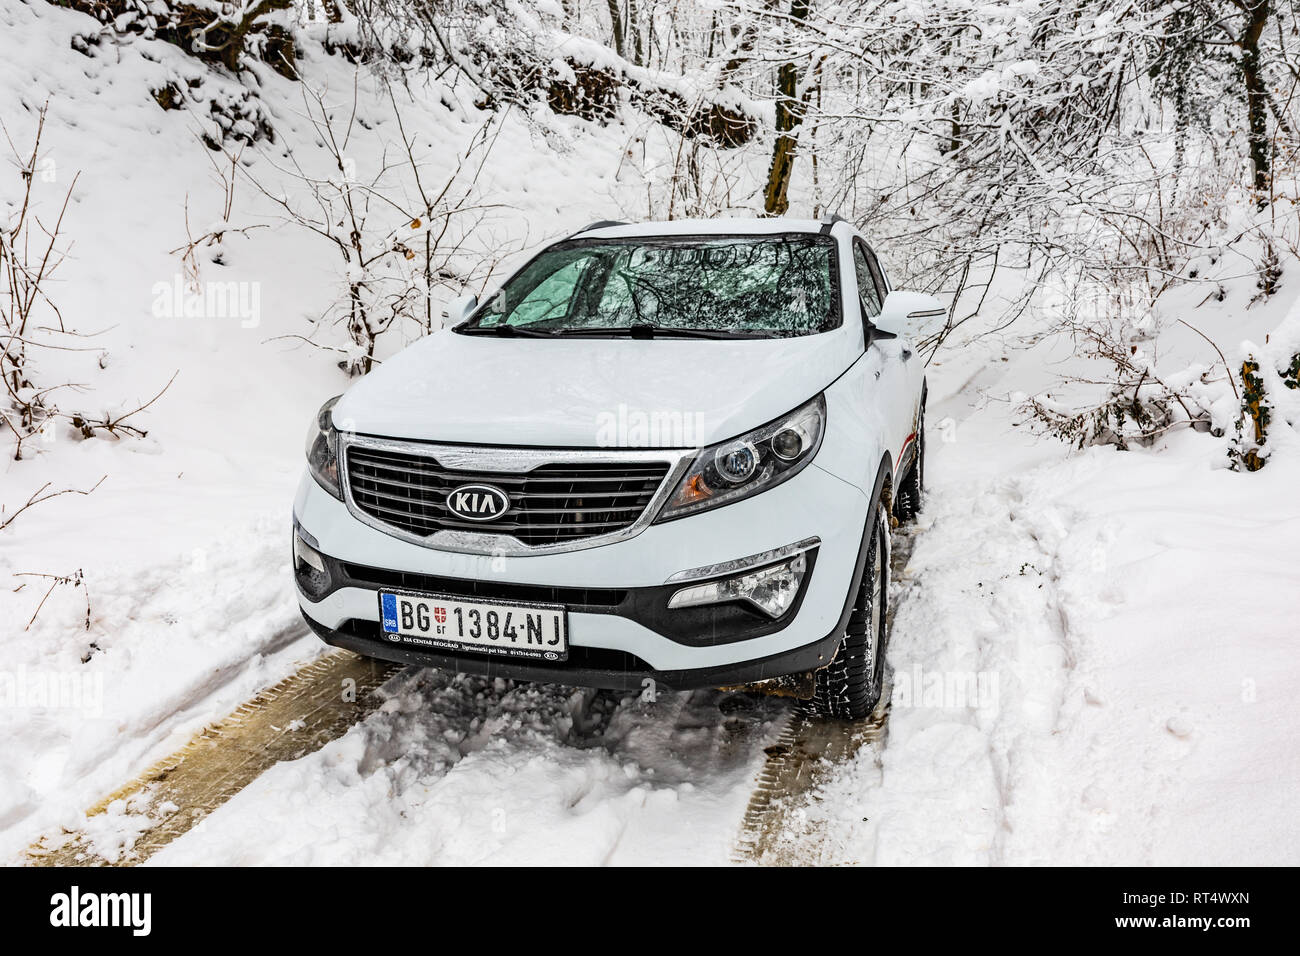 Kia Sportage 2.0 CRDI awd or 4x4, white color, in a forest road, covered with deep snow and ice. Extreme conditions and temperatures below -10 Stock Photo